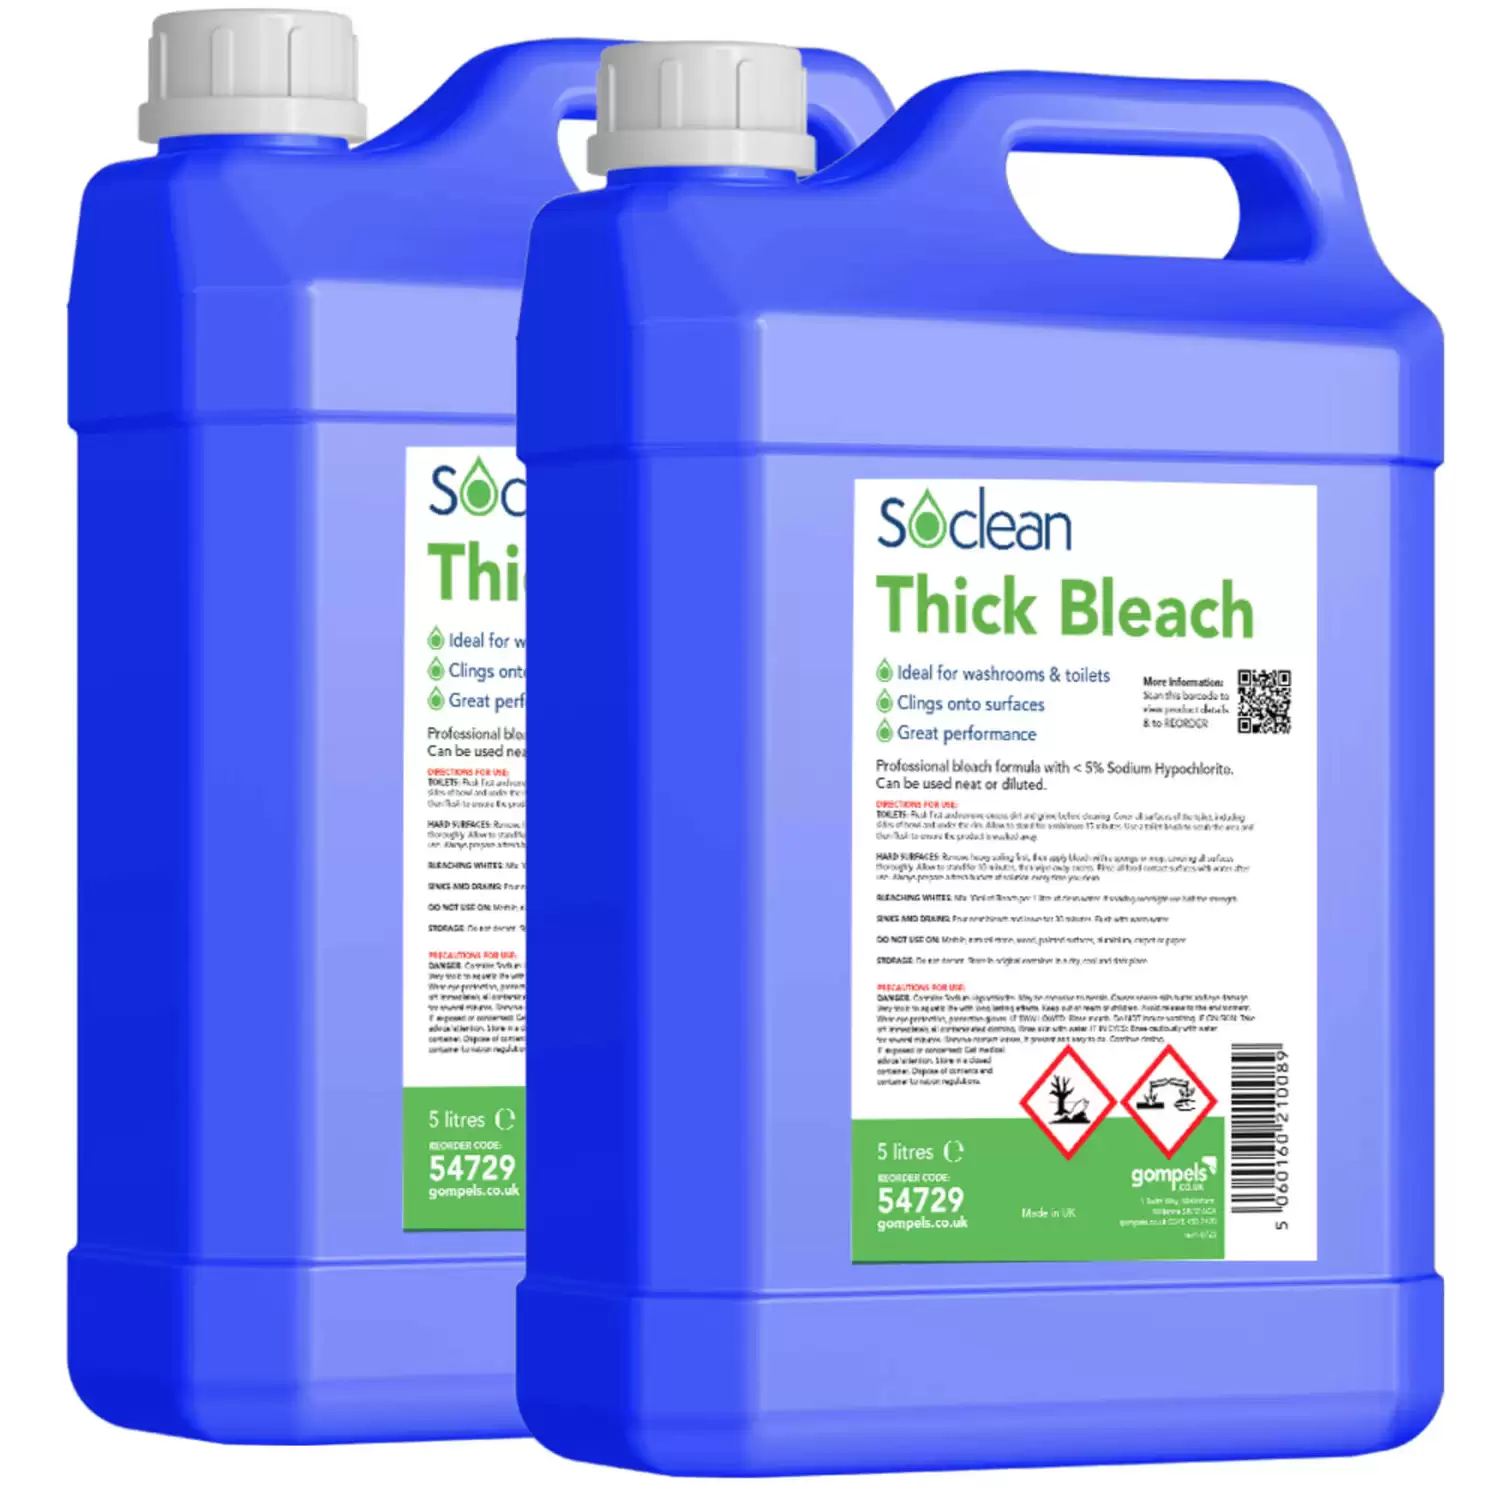 Thick Bleach, Home and Hygiene